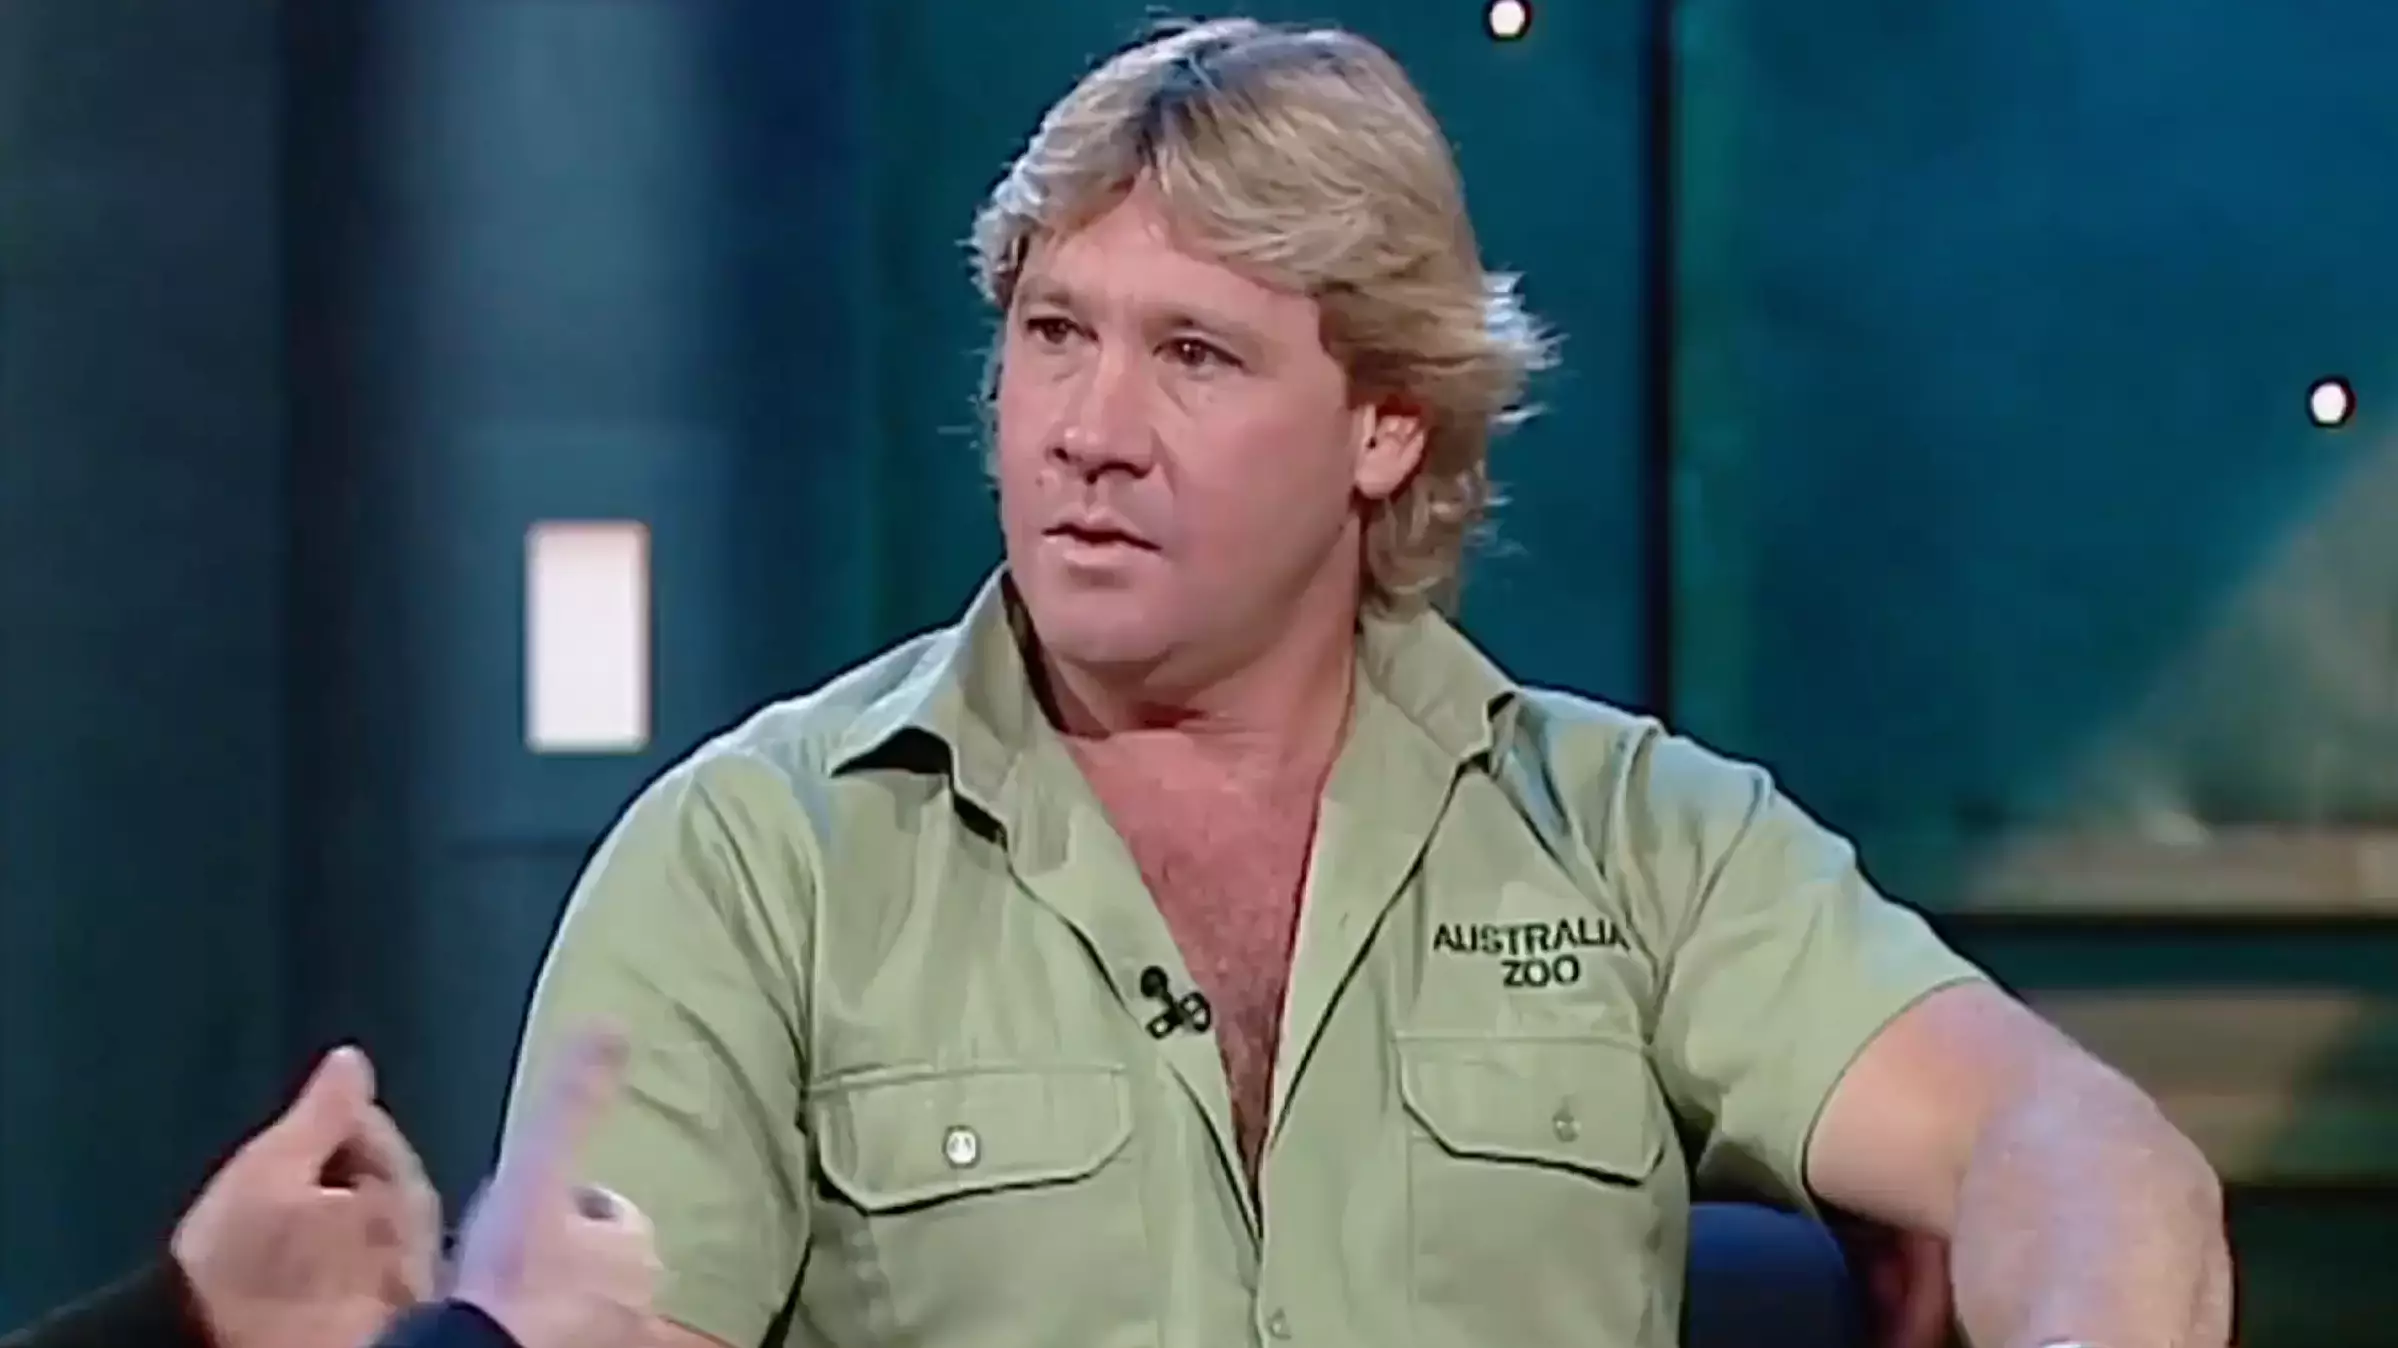 Resurfaced Video Of Steve Irwin On Rove Reminds People Why He Was Such A Legend